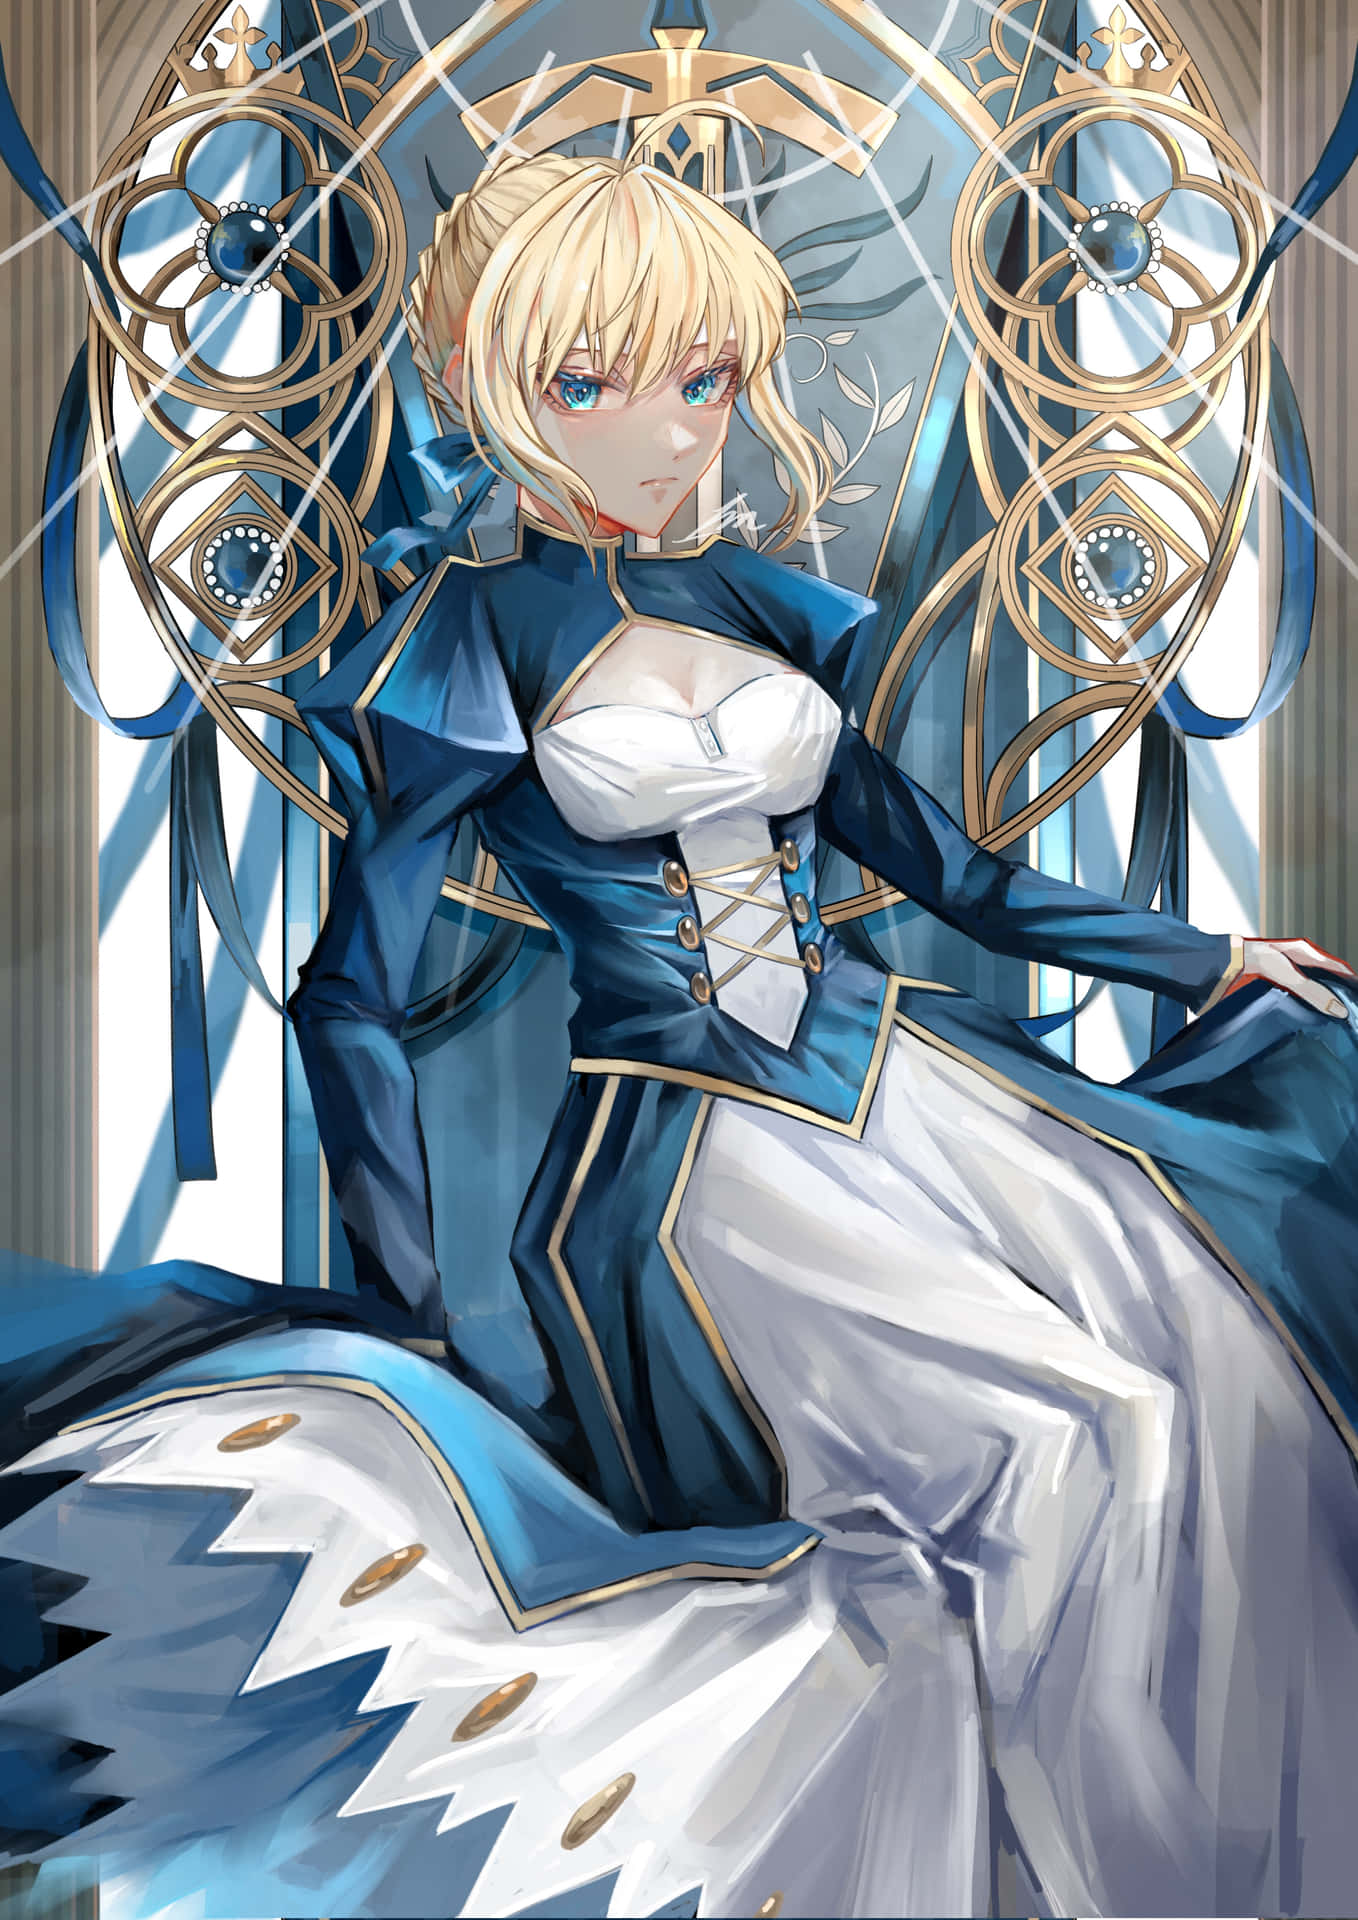 Saber Fate Stay Night On Steel Throne Wallpaper